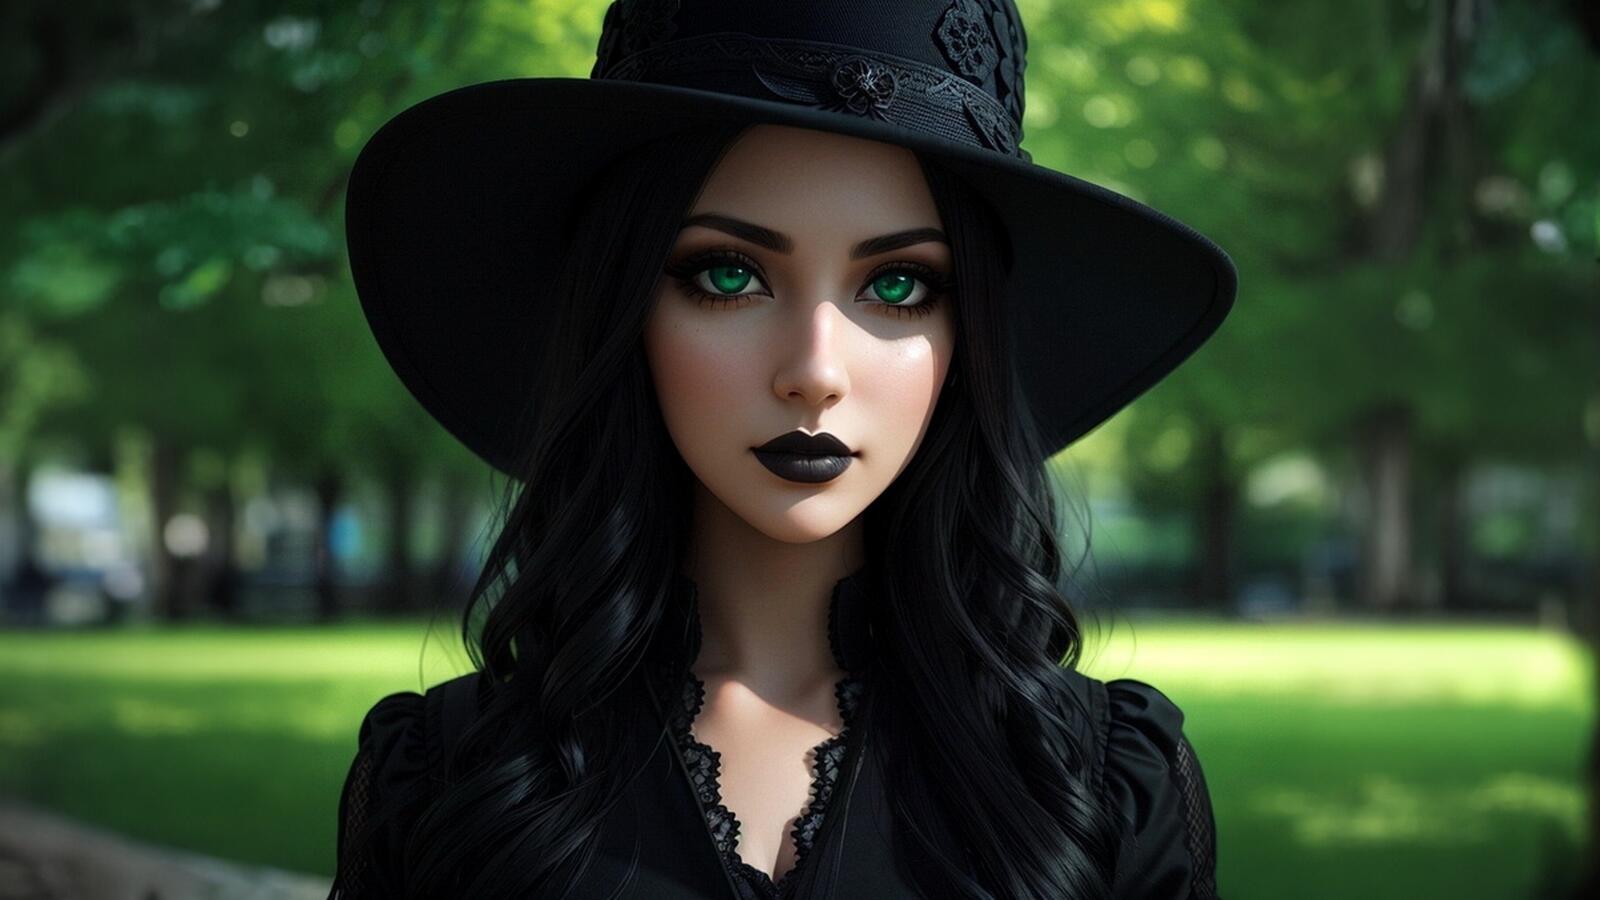 Free photo Portrait of a girl in a black hat in the park